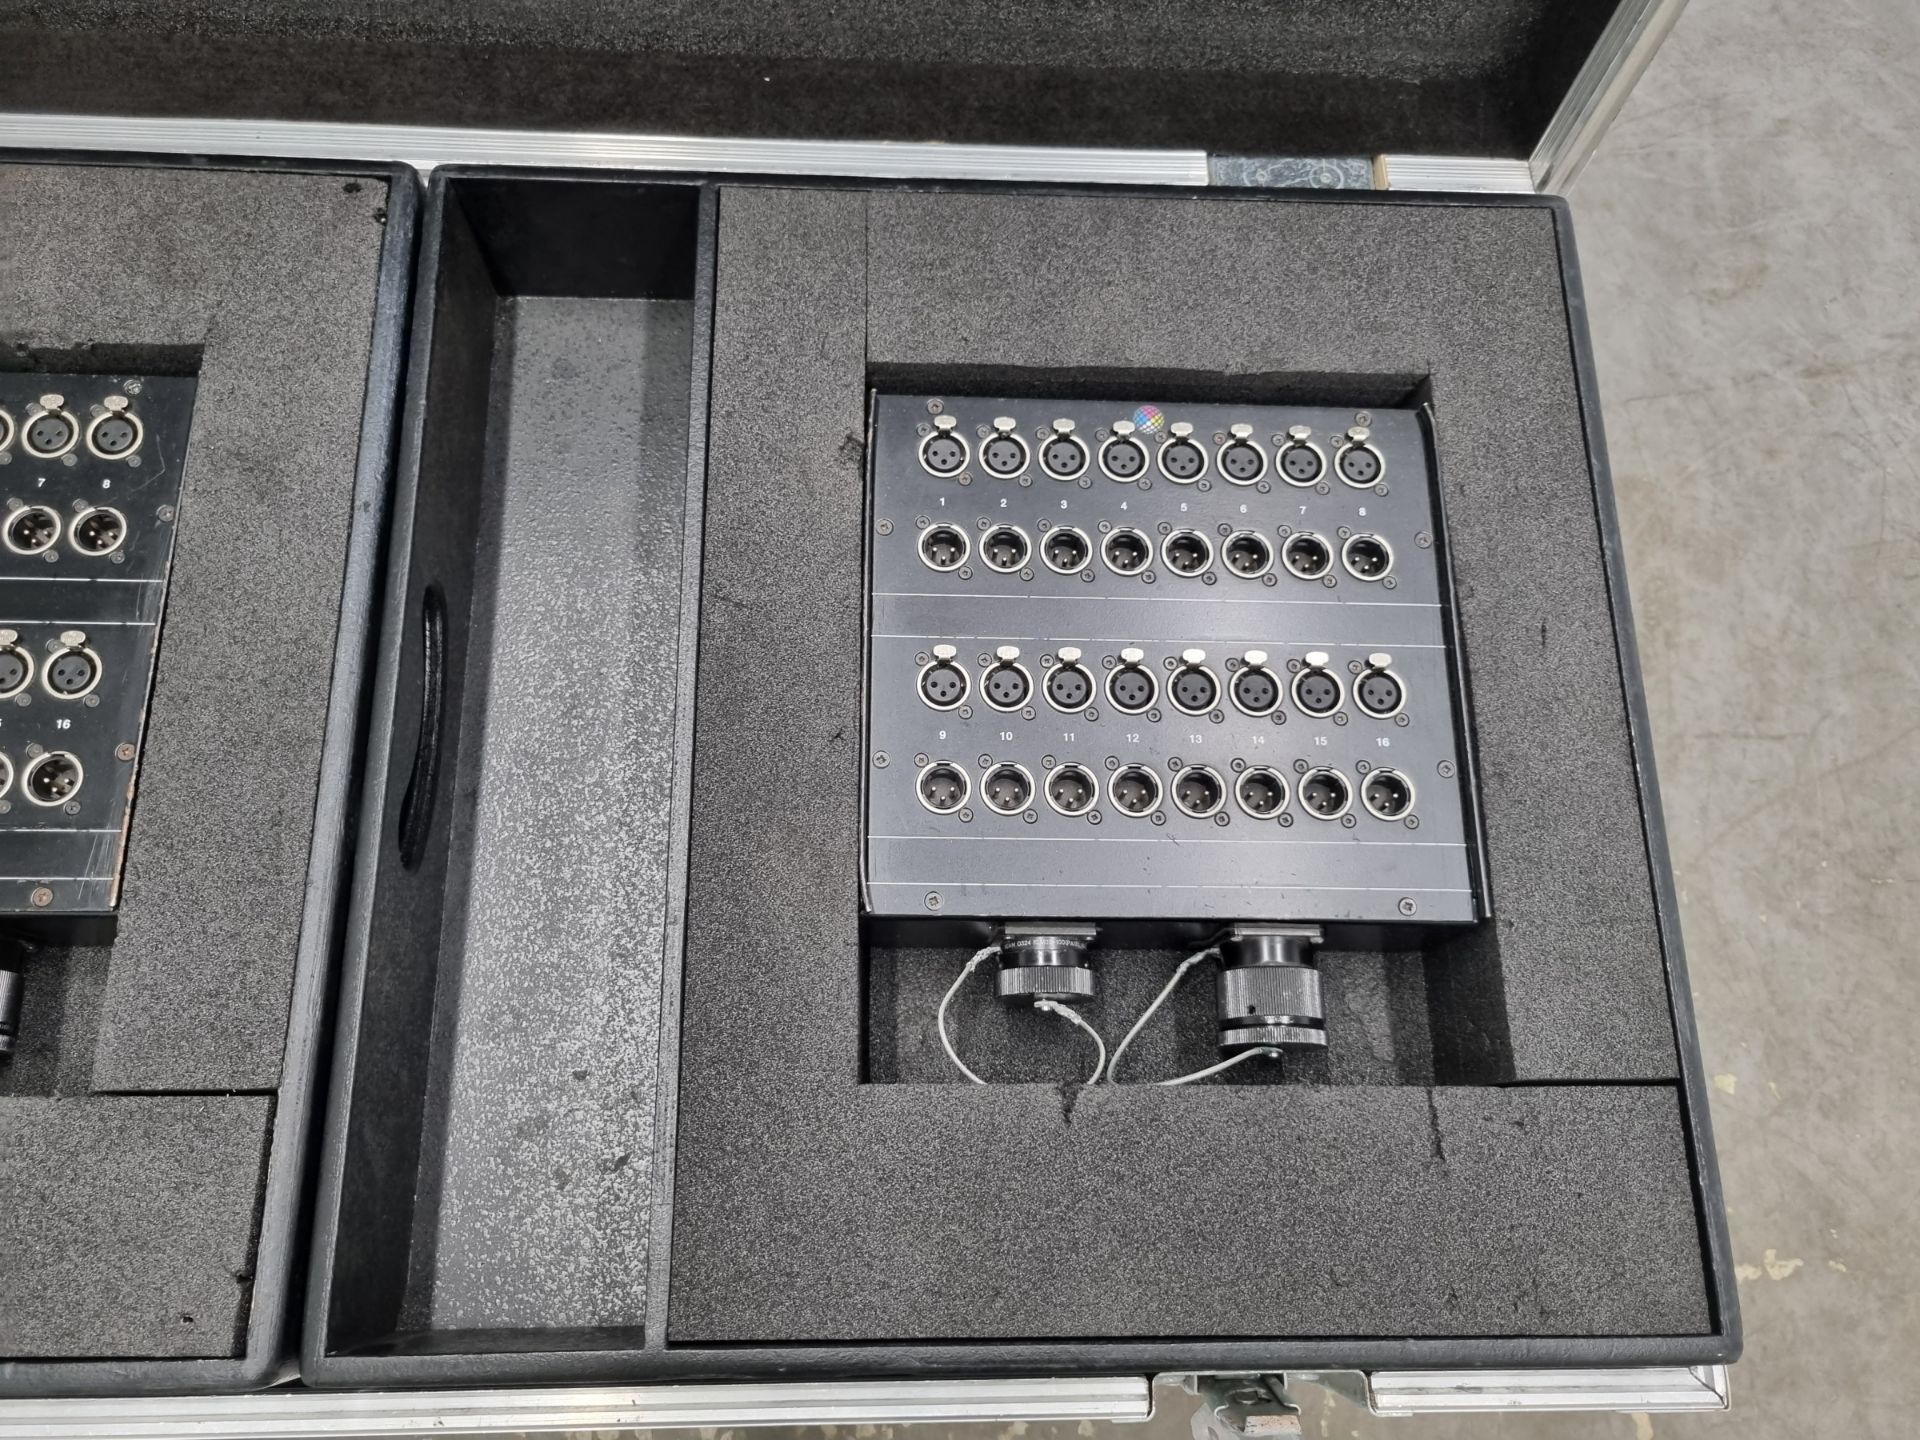 2x 16 input and output XLR stageboxes with multicore loom and mains cable in flight case on wheels - Image 2 of 8